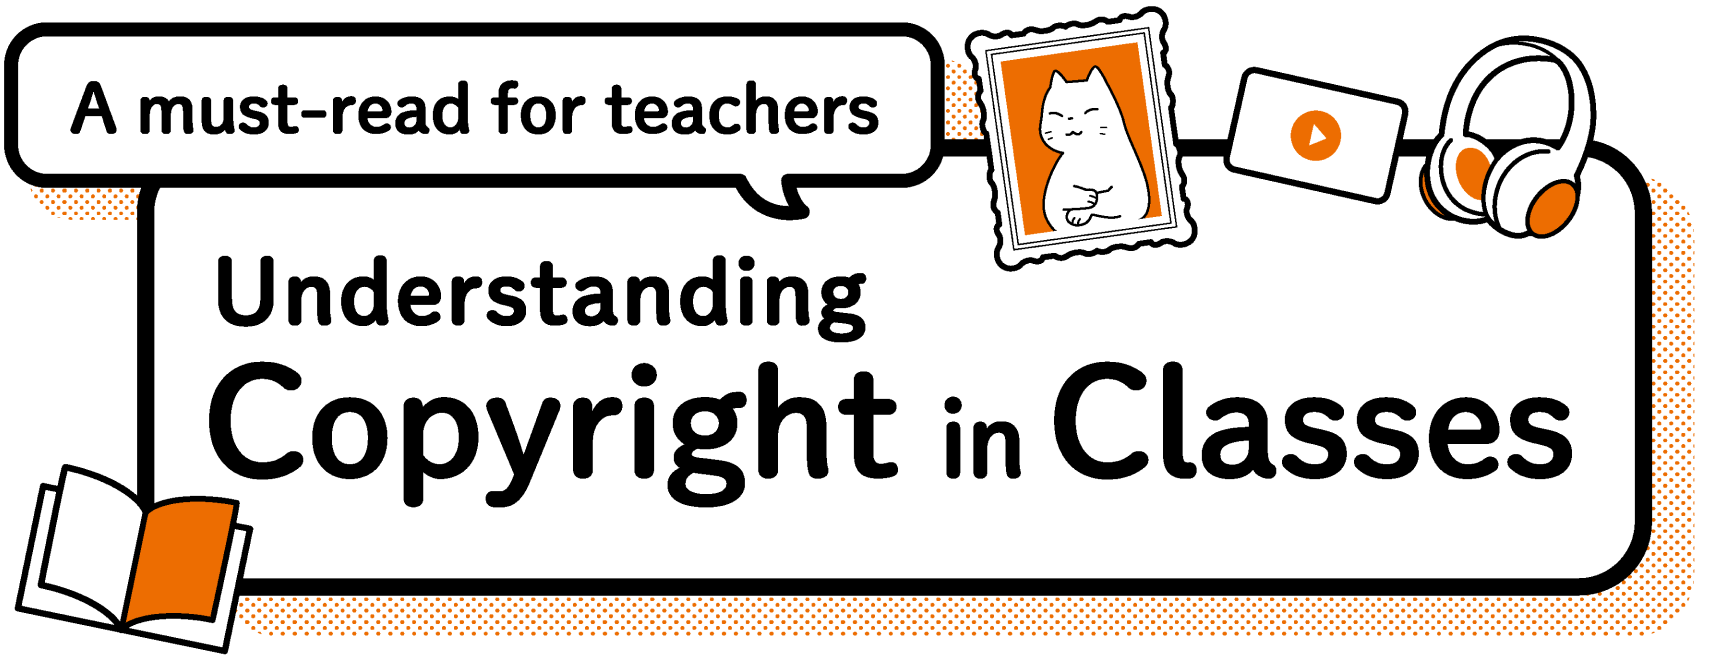 A must-read for teachers Understanding Copyright in Classes